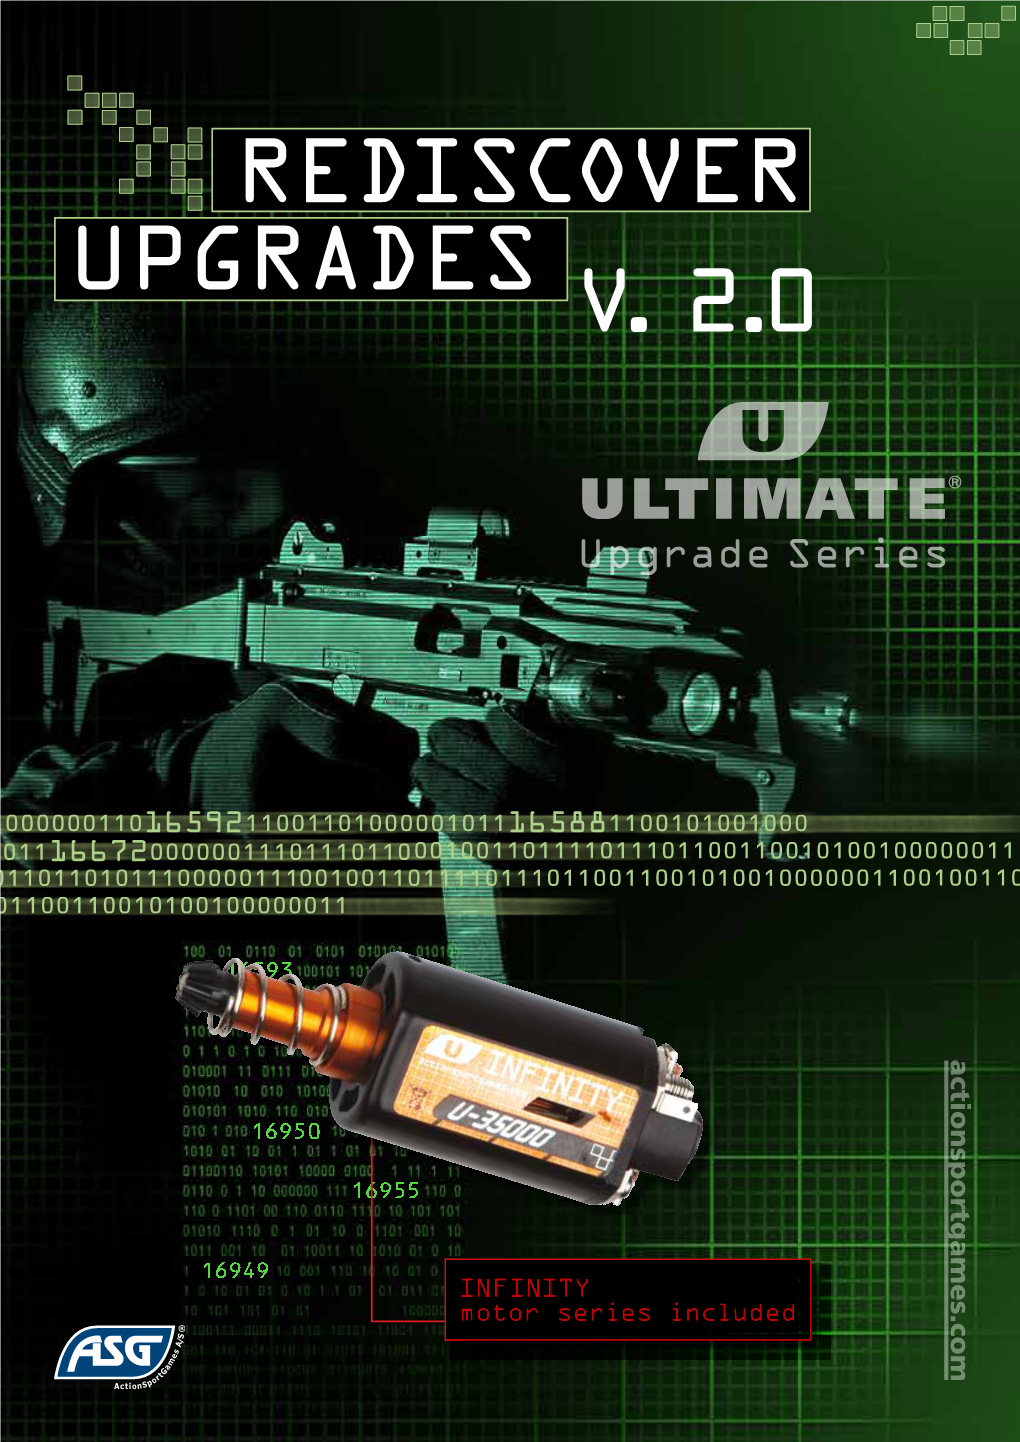 INFINITY Motor Series Included Airsoft Gamers Have Always Sought New Ways in Which to Improve Their AEG’S